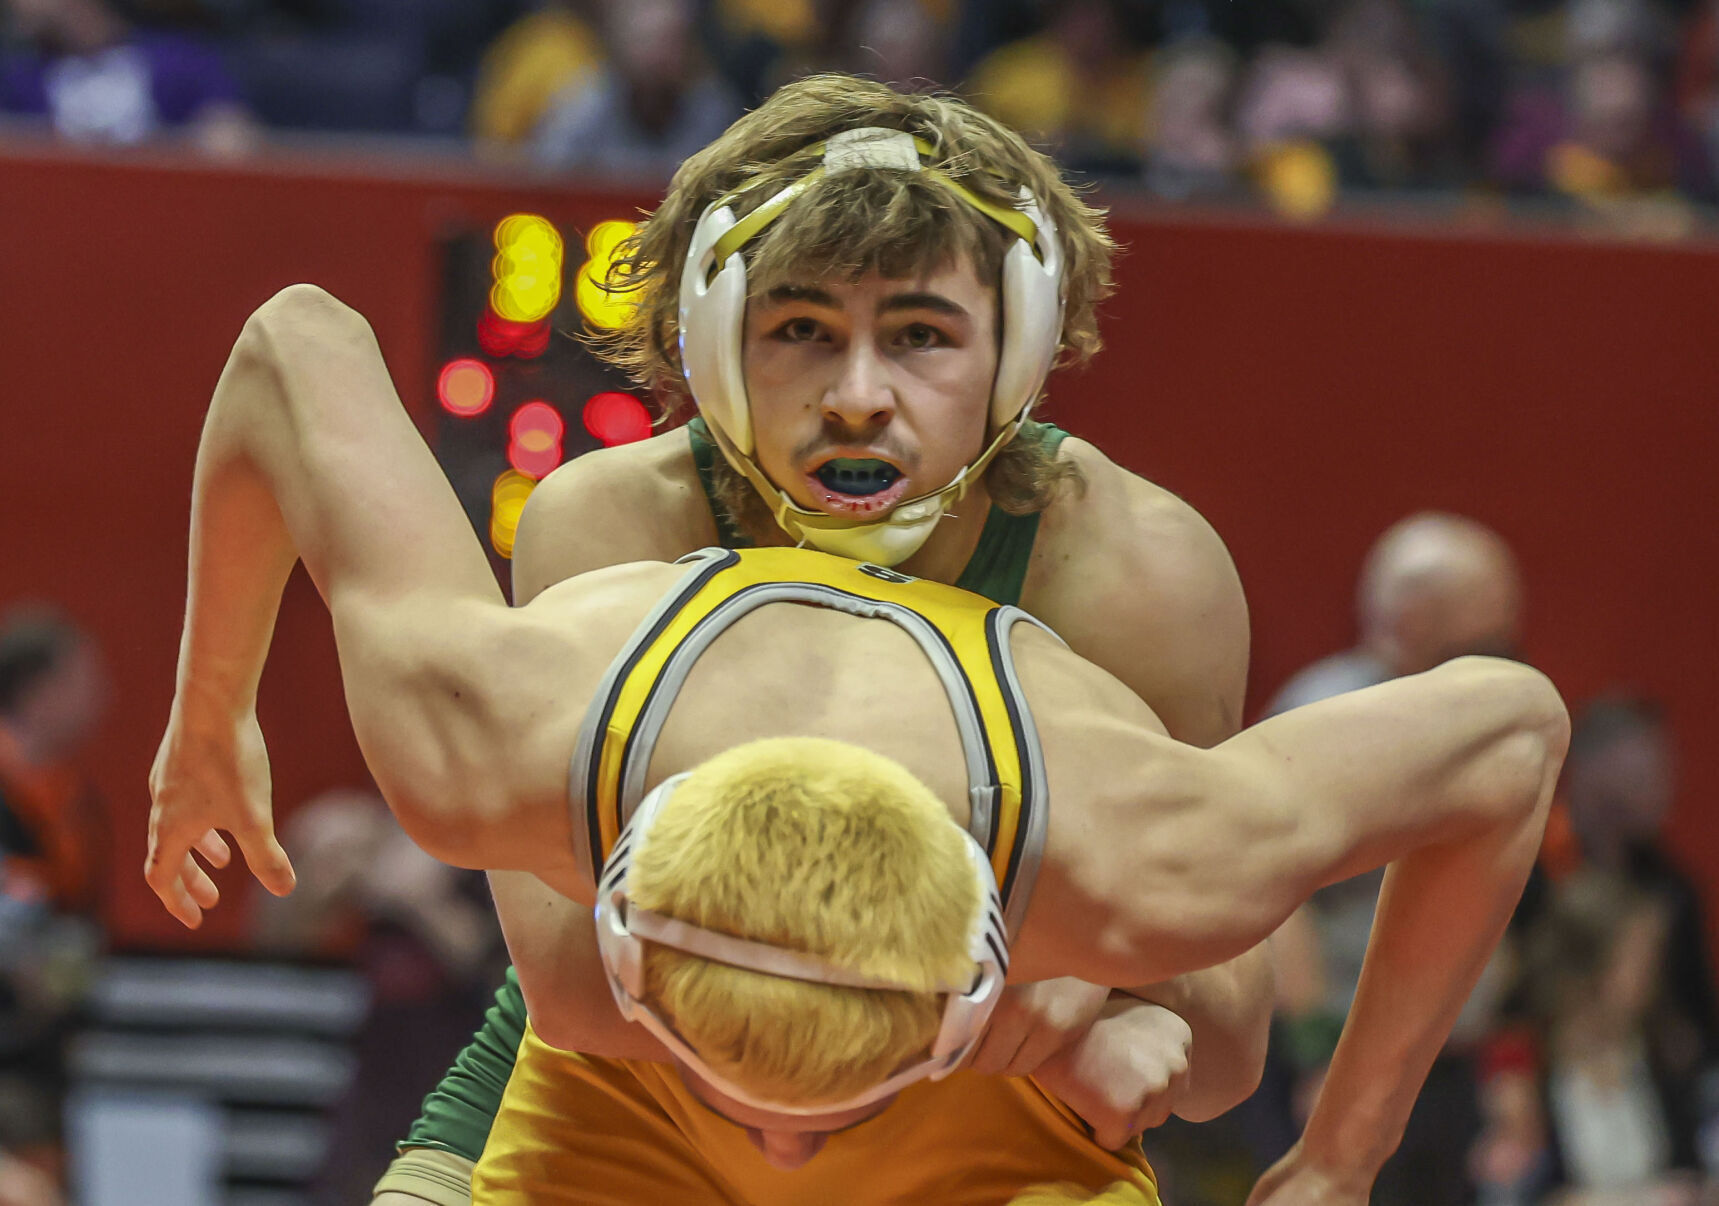 Mattoon Wrestlers Advance to IHSA Boys Wrestling State Meet in Champaign